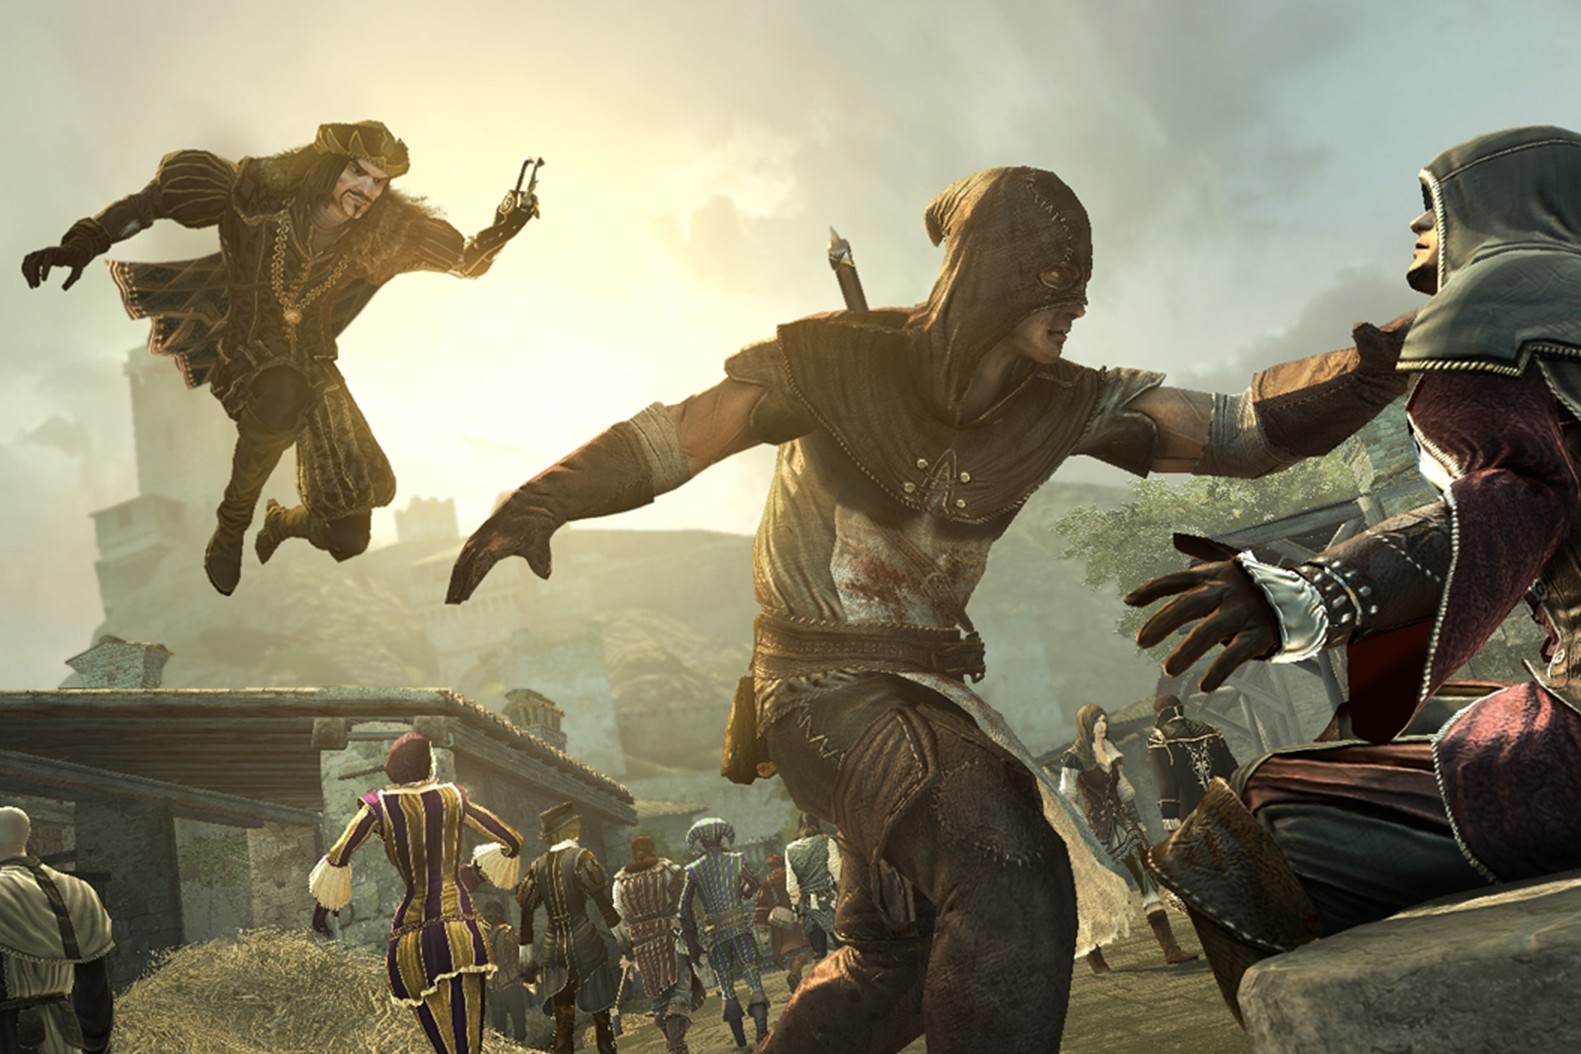 Assassin's Creed Infinity is built as a platform for future games